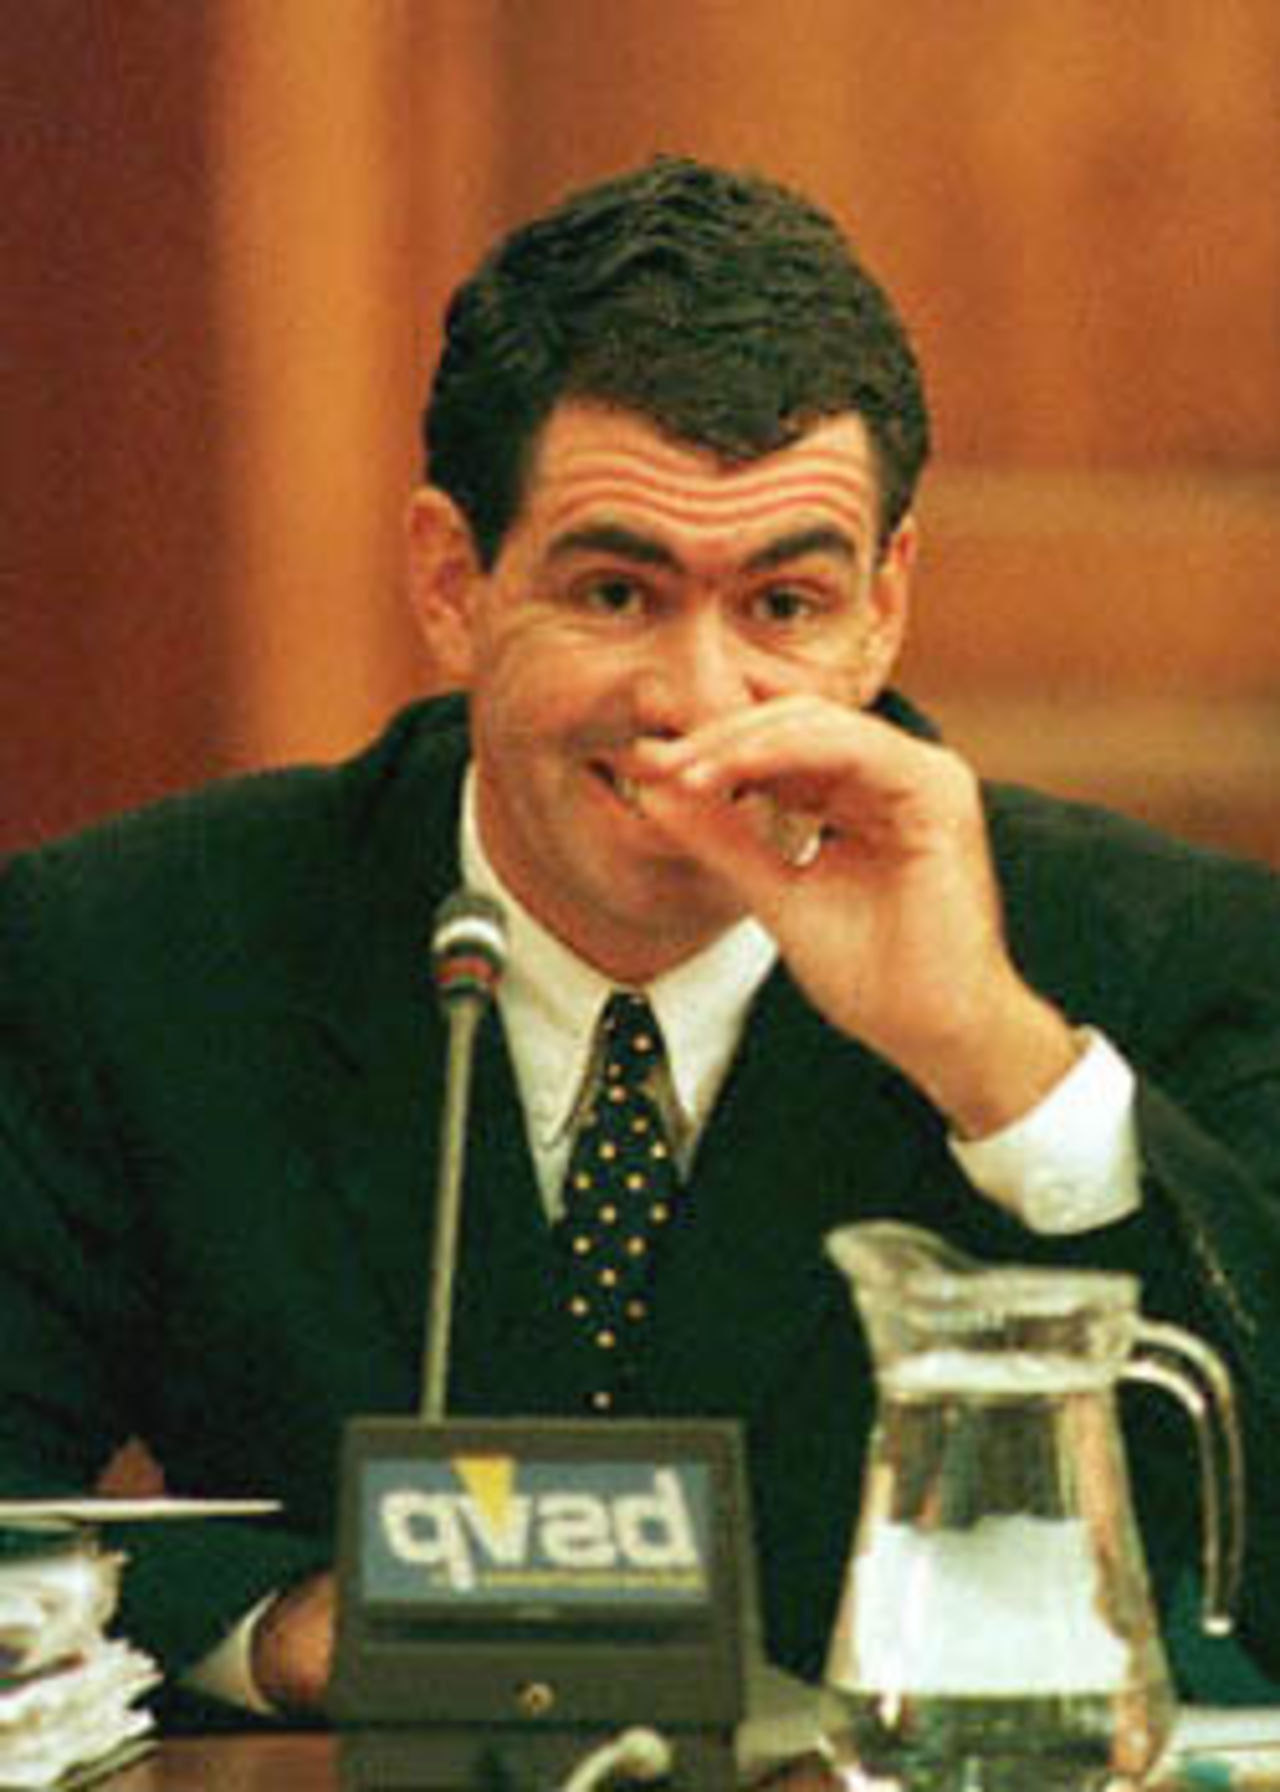 Former South African cricket captain Hansie Cronje grimaces during his cross-examination at the King Commission of Inquiry into allegations of cricket match-fixing in Cape Town 23 June 2000. Cronje and his legal team became embroiled in a dispute yesterday over the validity of transcripts released by Indian police during the sacked South African captain's cross examination at the King commission.